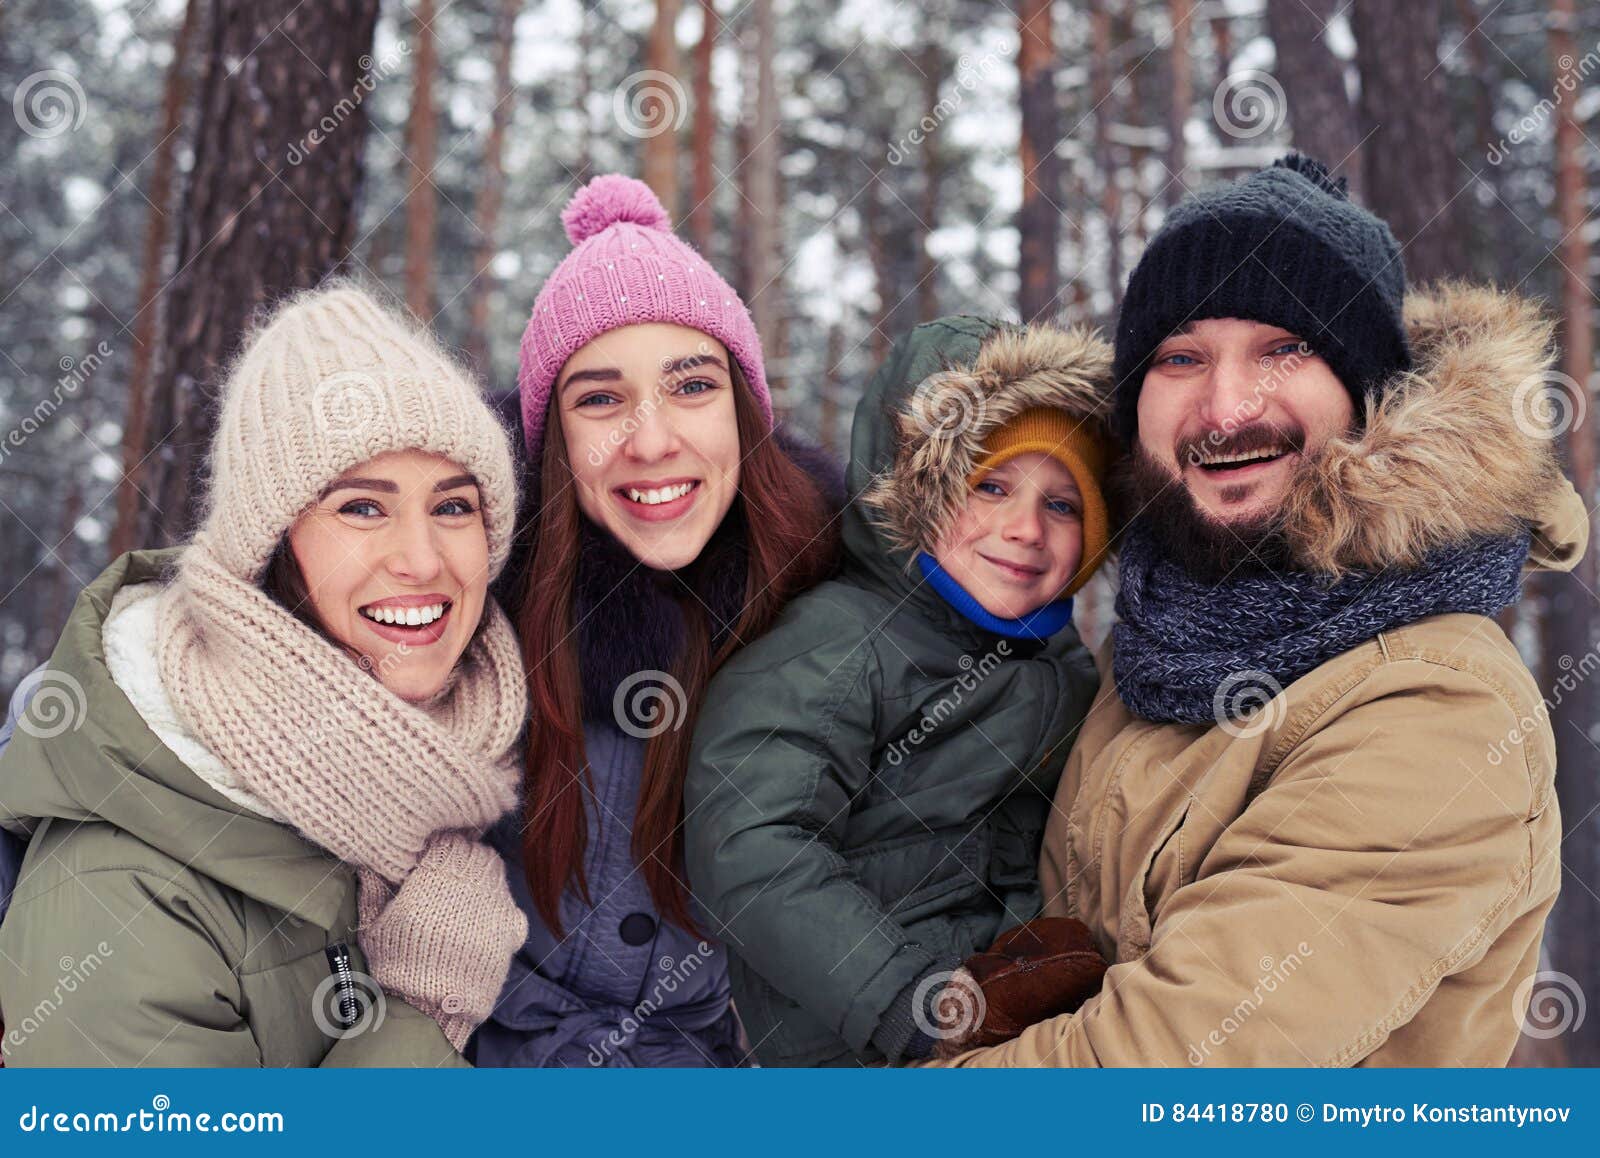 Funny Family of 4 Members Smiling and Laughing during the Winter ...